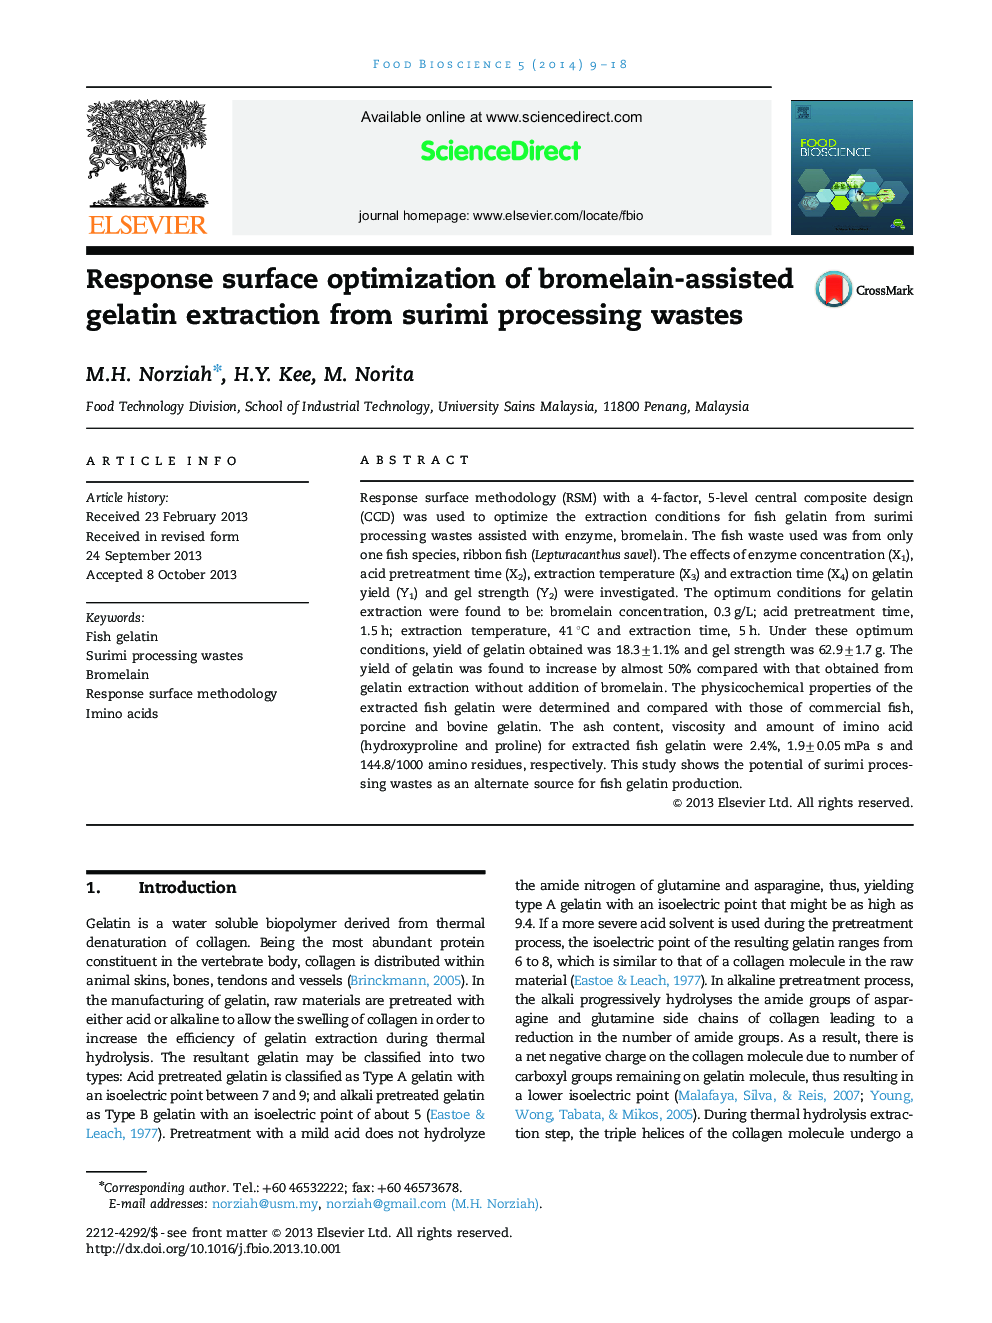 Response surface optimization of bromelain-assisted gelatin extraction from surimi processing wastes